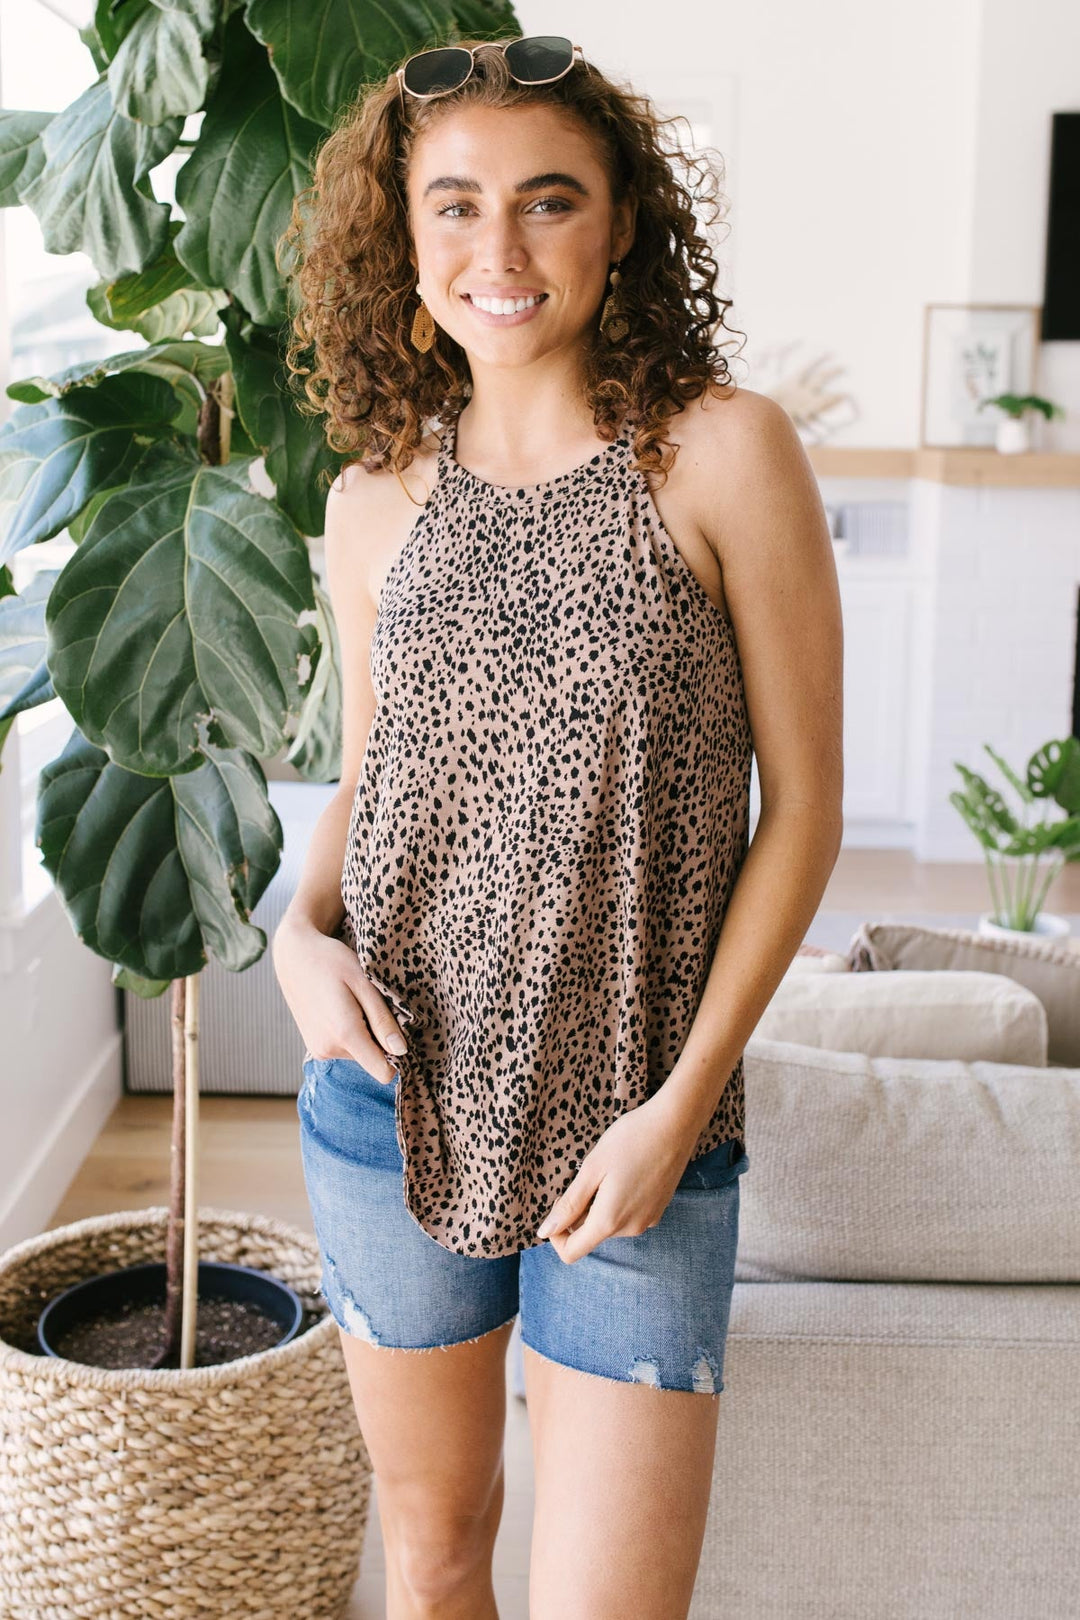 Sprinkled With Animal Print Top